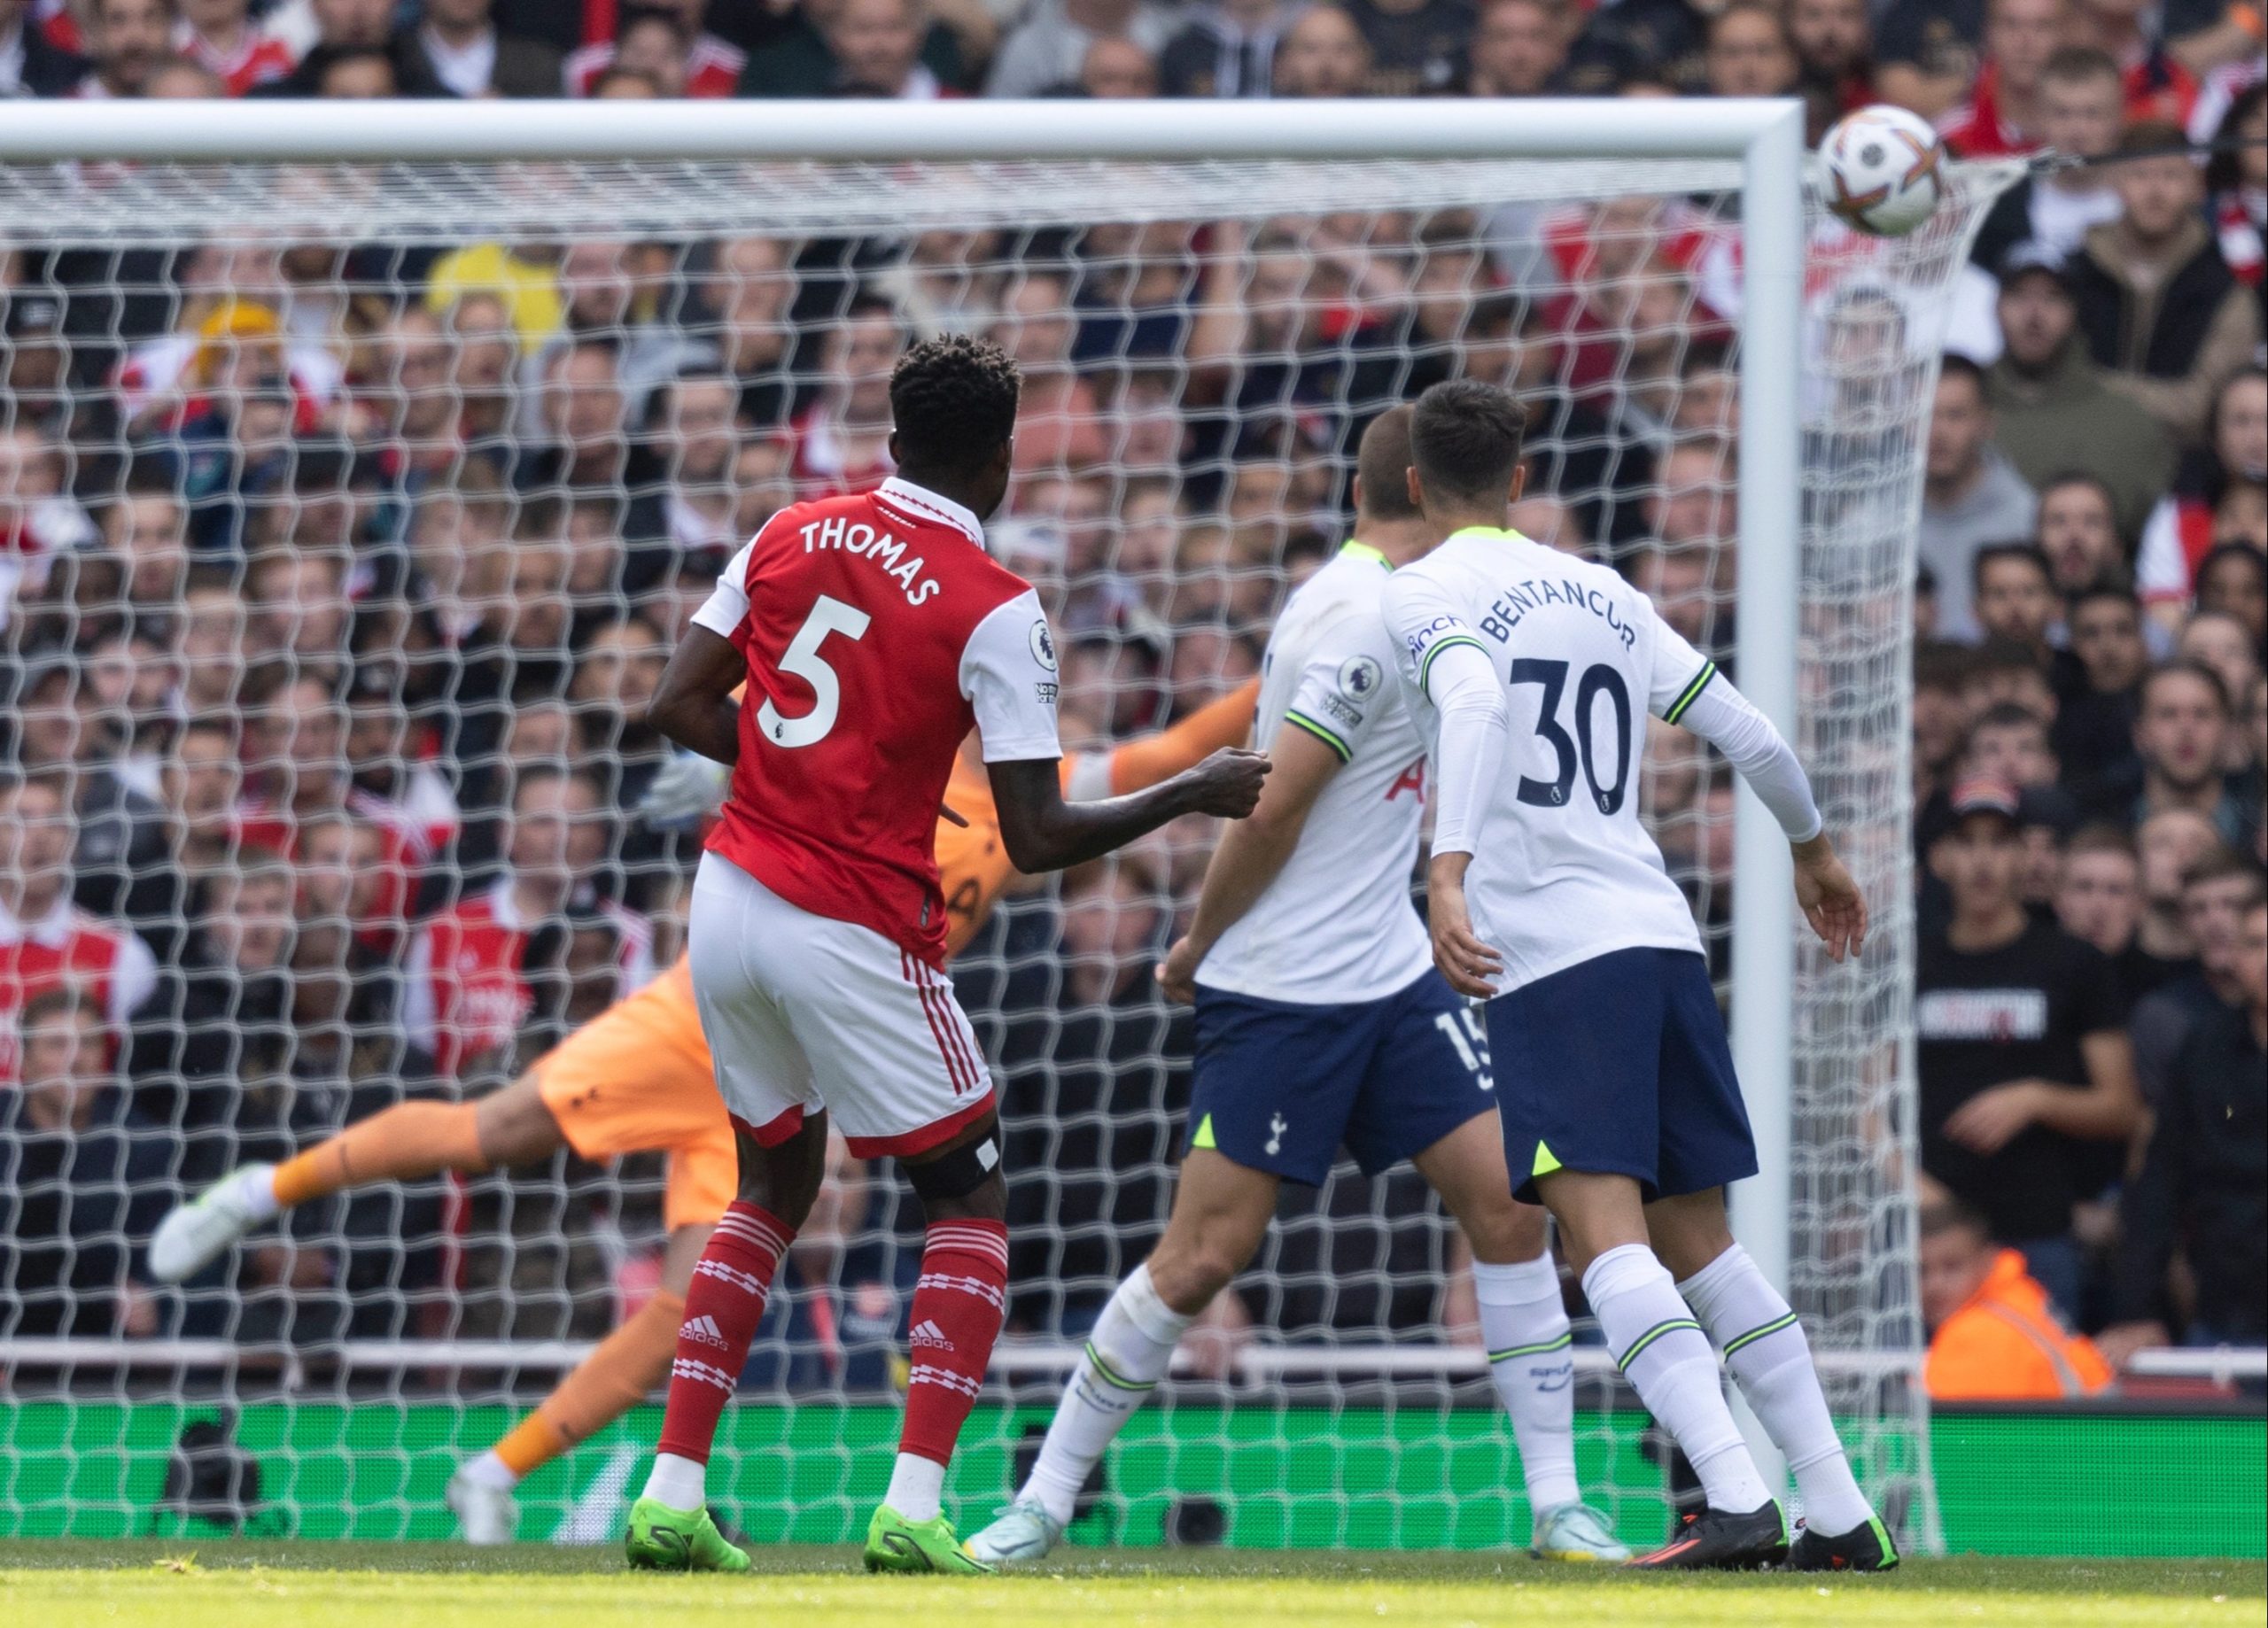 Thomas Partey's incredible goal against Tottenham named Arsenal's second best goal of the season